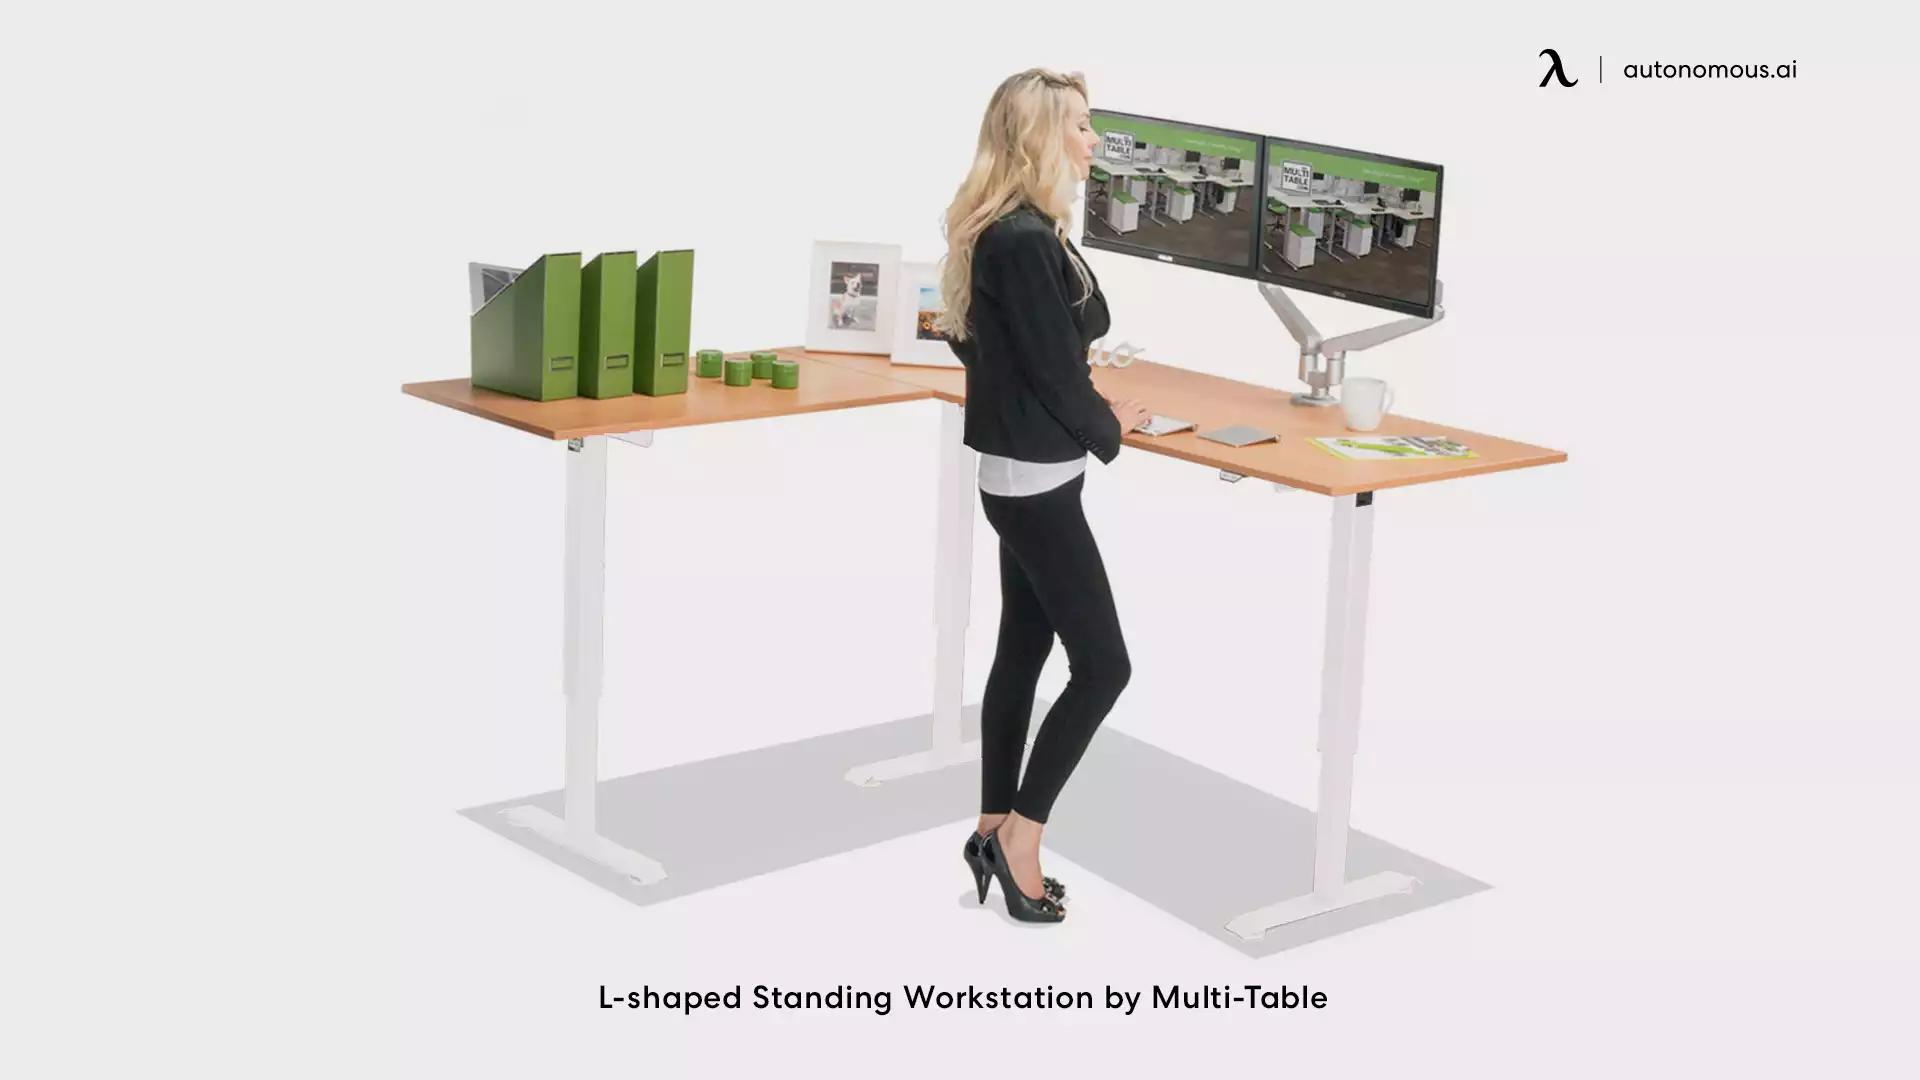 L-shaped Standing Workstation by Multi-Table